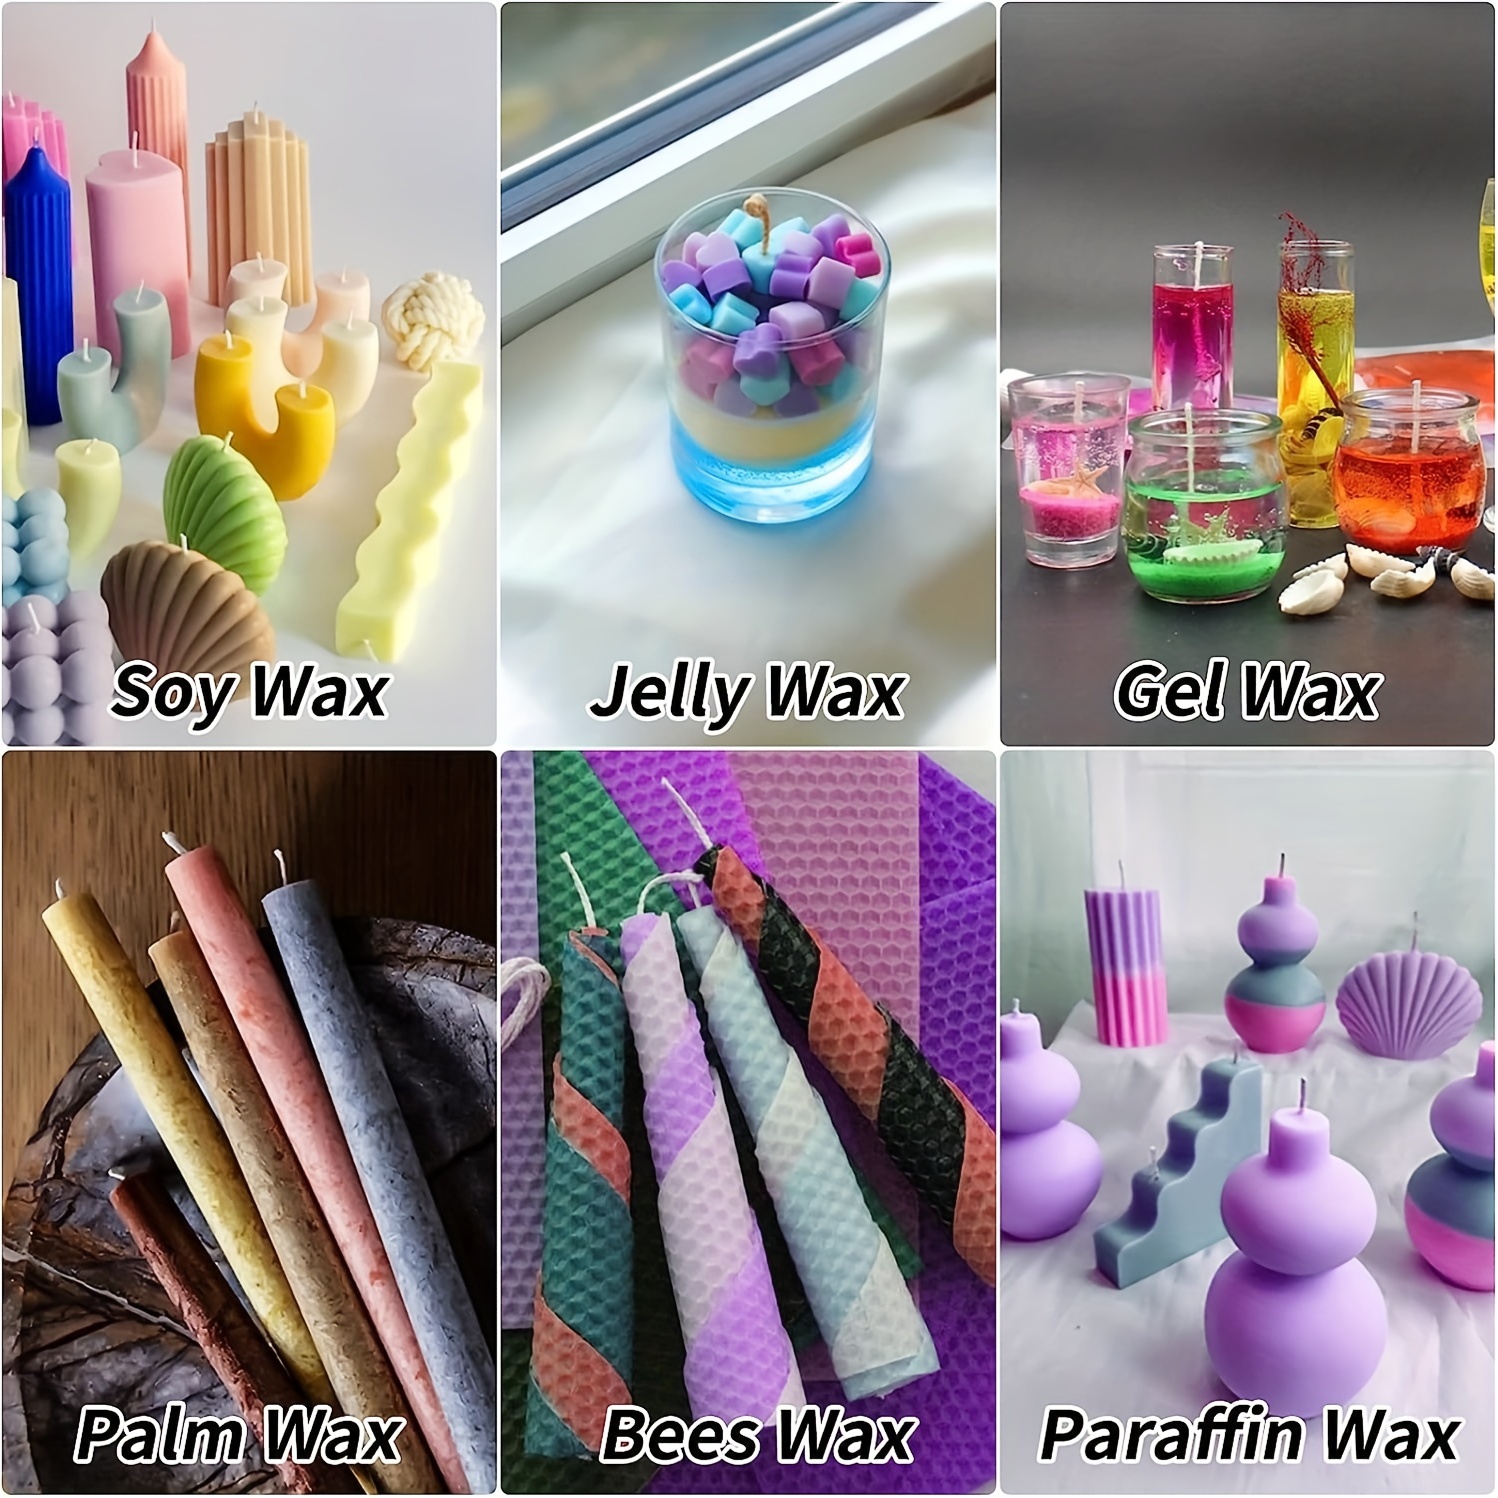 18pcs Candle Color Dye Non-Toxic For DIY Candle Making Supplies - Vibrant  Concentrated Candle Coloring For Soy Wax Dyes, Beeswax, Gel Wax, Candle Maki